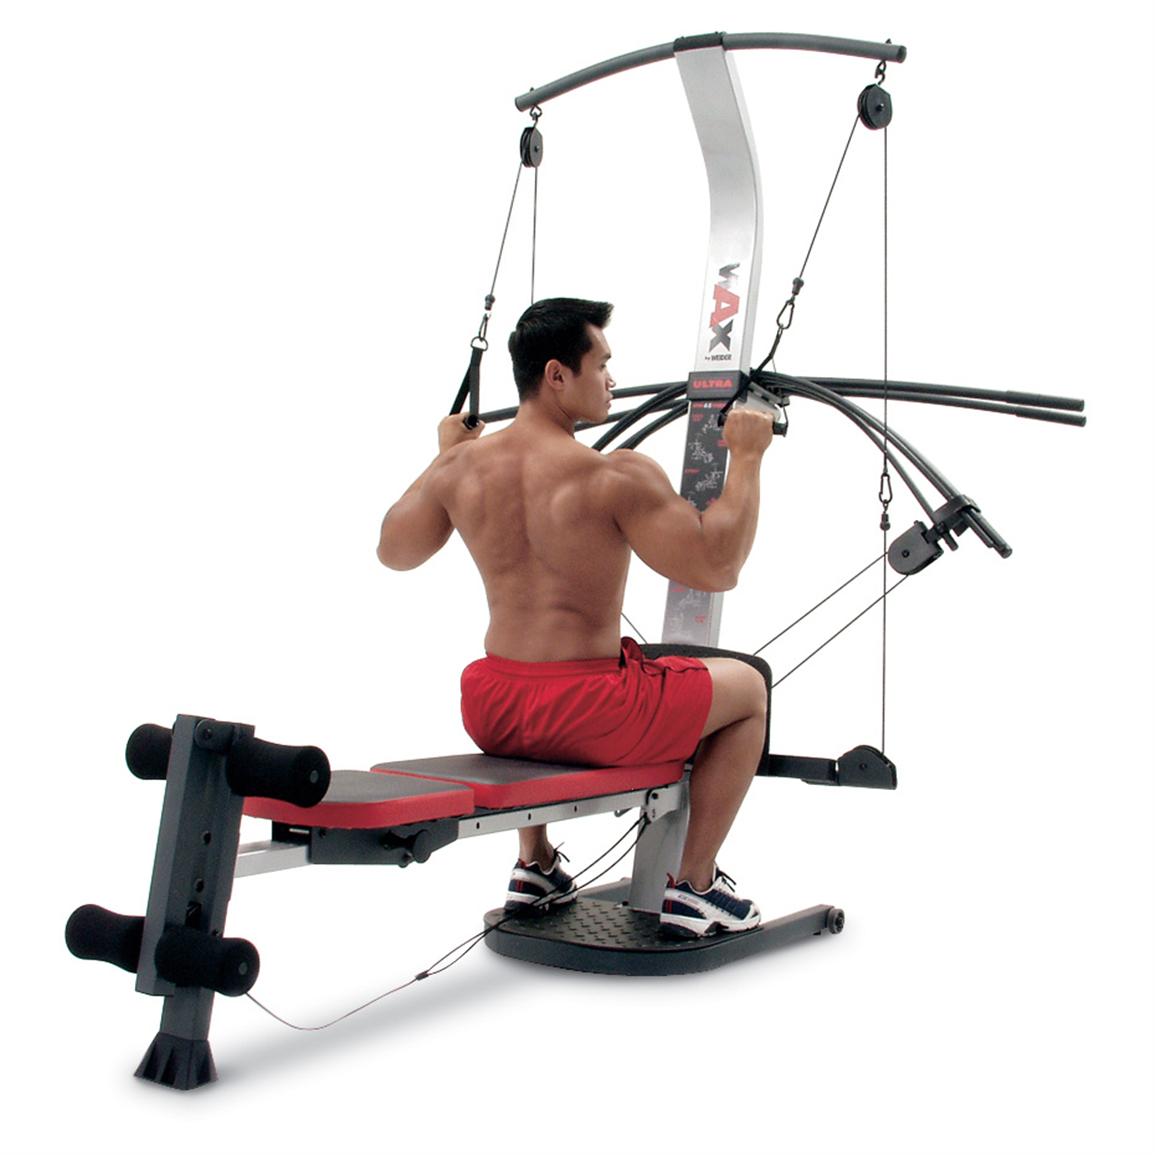 Weider Xp 400 Exercise Chart